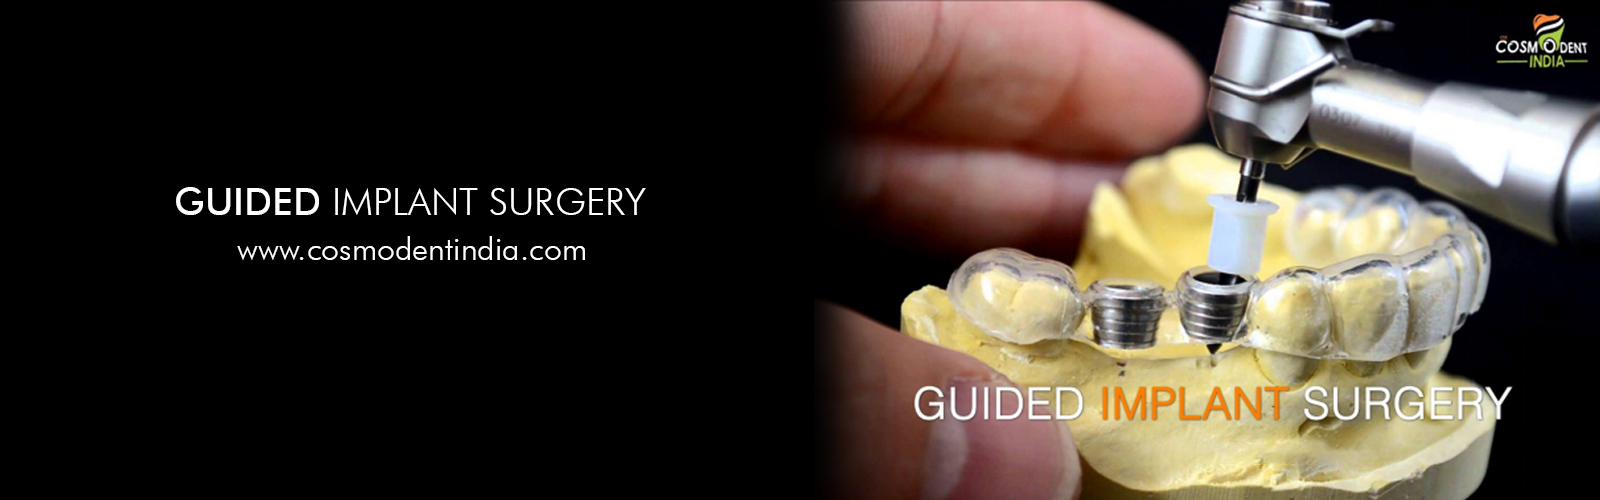 guided-implant-surgery